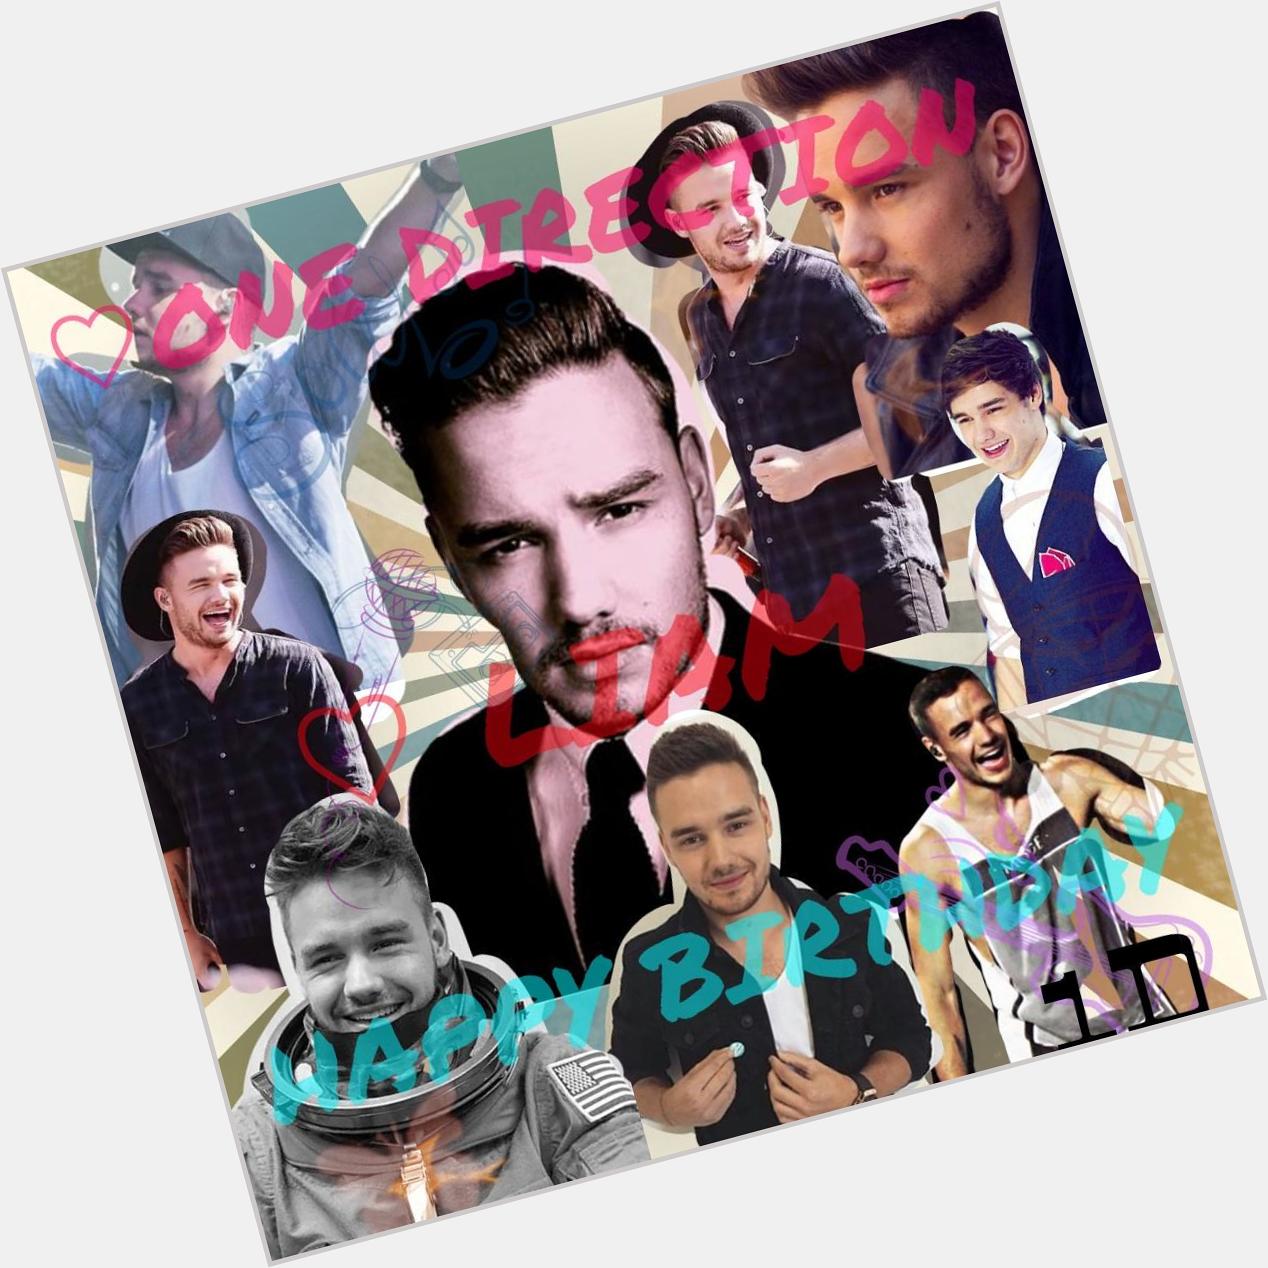  Happy Birthday to Liam hope for you happy. :) 